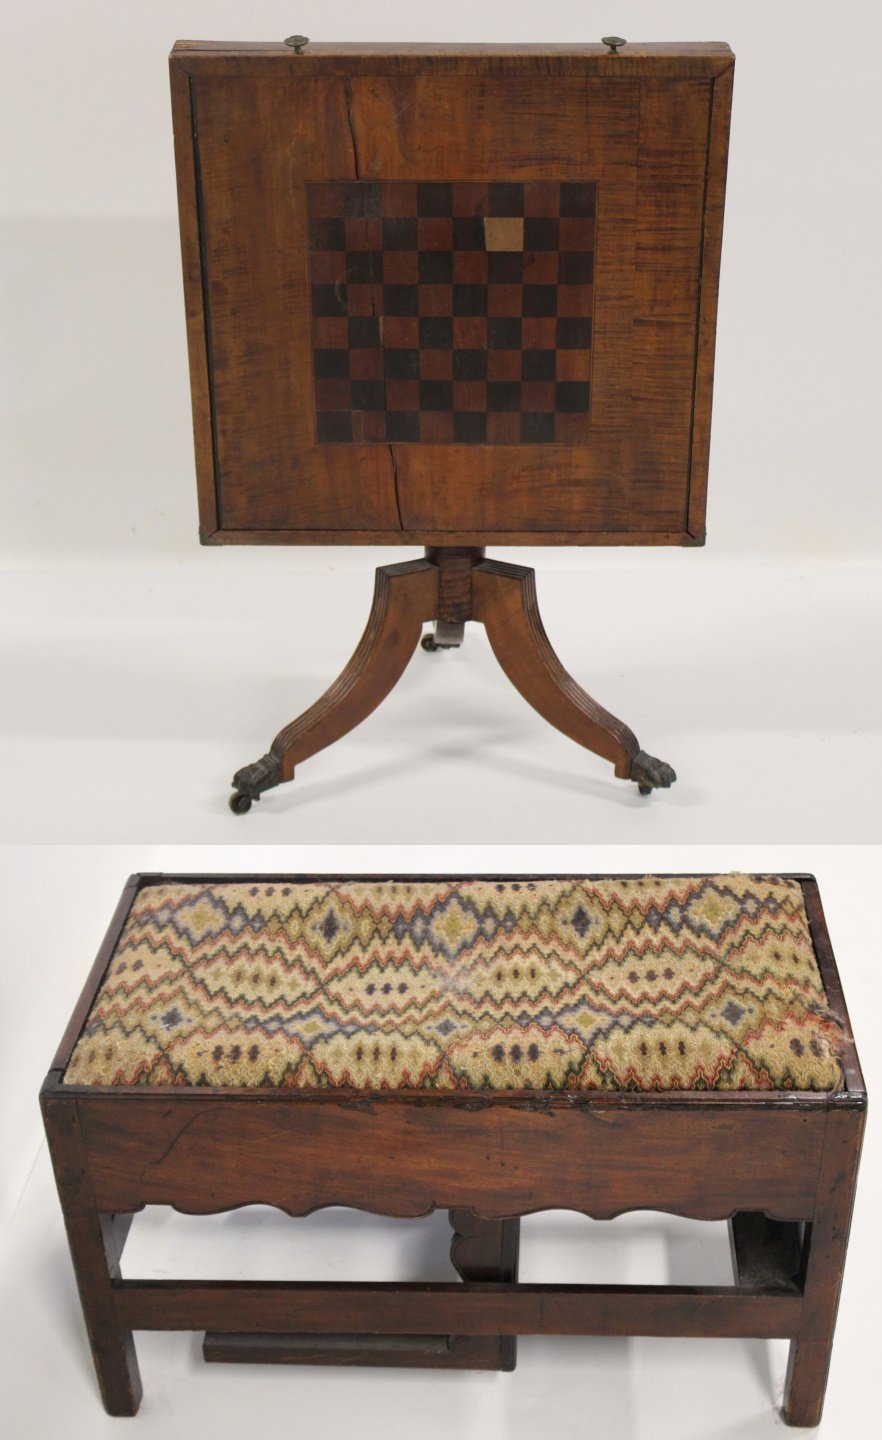 ANTIQUE GAME TABLE A METAMORPHIC 3b9745